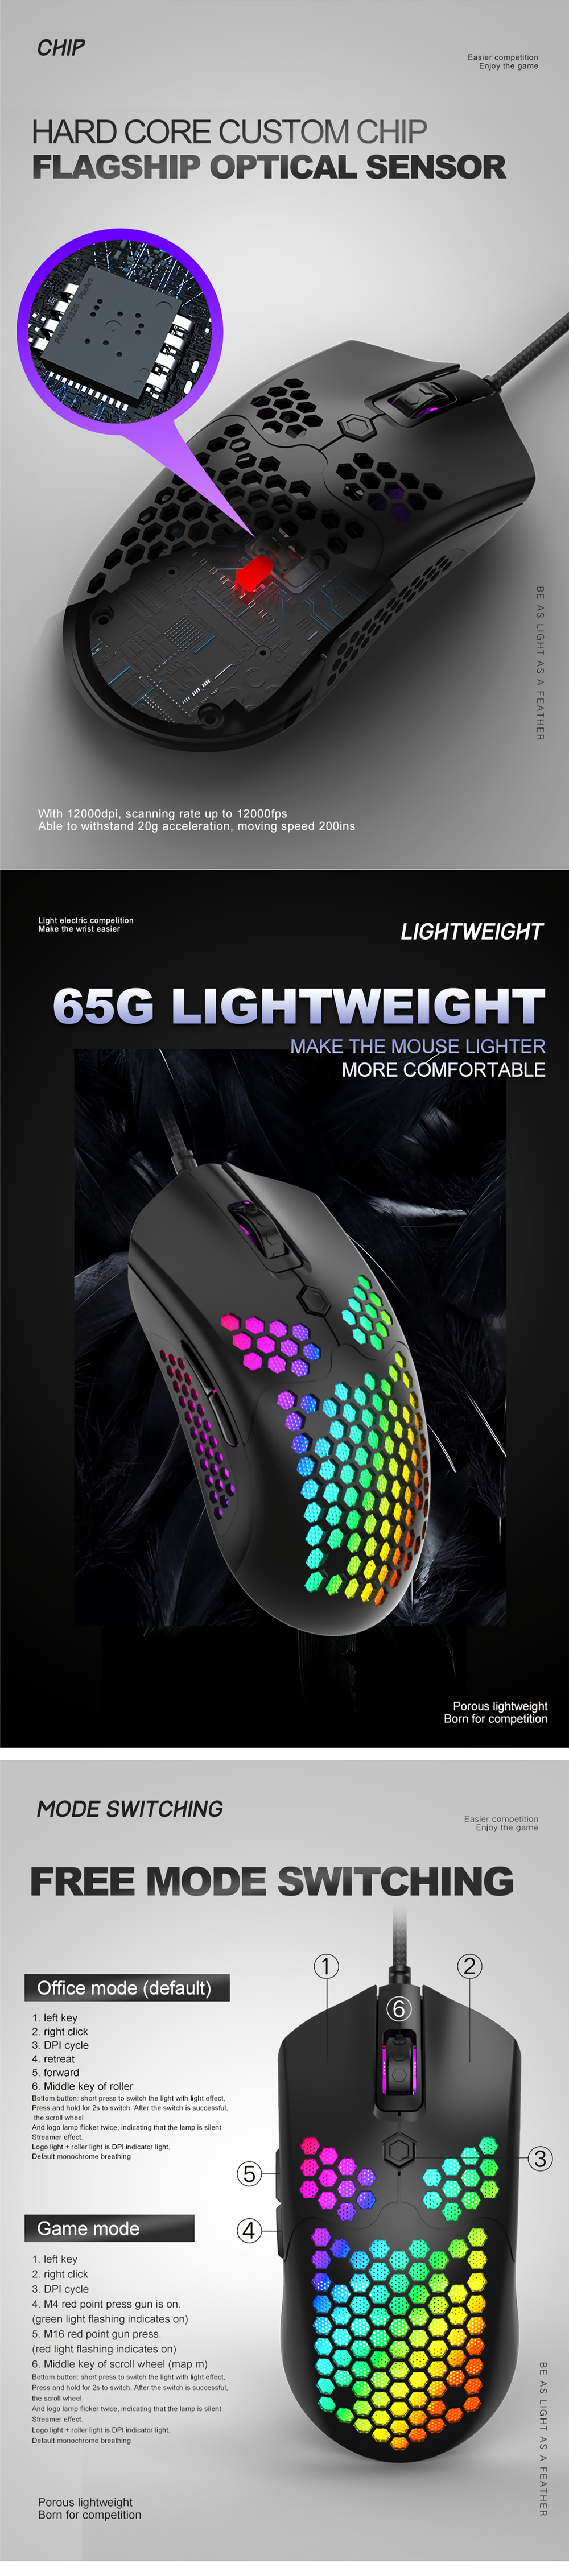 Free-wolf M5 Wired Game Mouse Breathing RGB Colorful Hollow Honeycomb Shape 12000DPI Gaming Mouse USB Wired Gamer Mice for Desktop Computer Laptop PC 2